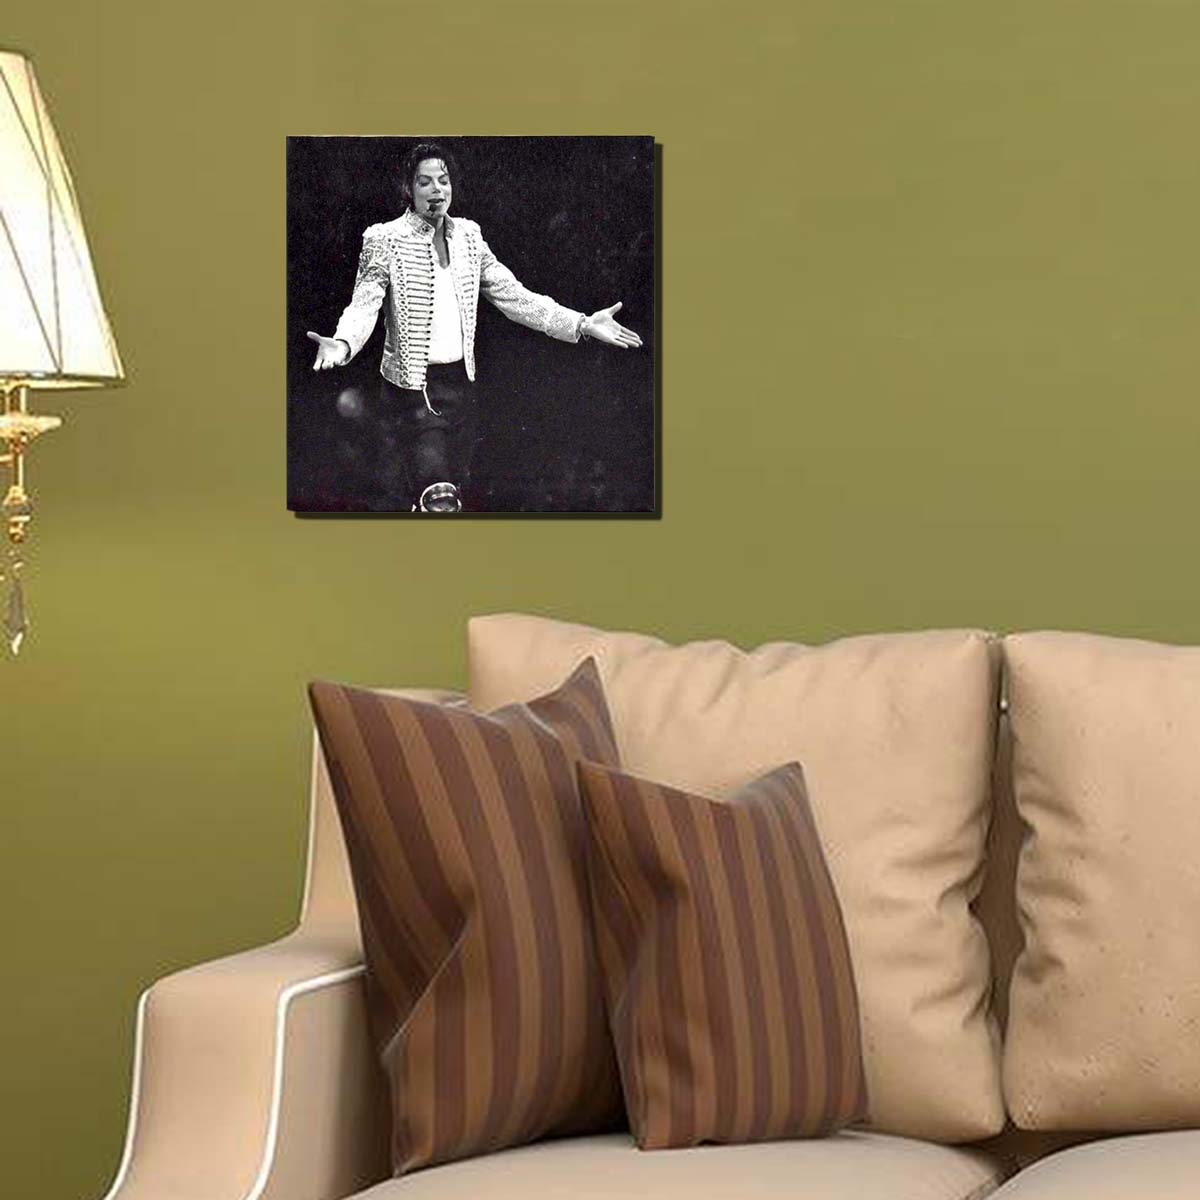 Kookee Canvas Modern Wall , Michael Jackson Painting for Home Living Room, Bedroom, Office Decor Ready to Hang (20cmx20cm) (F1-595118-4-B)